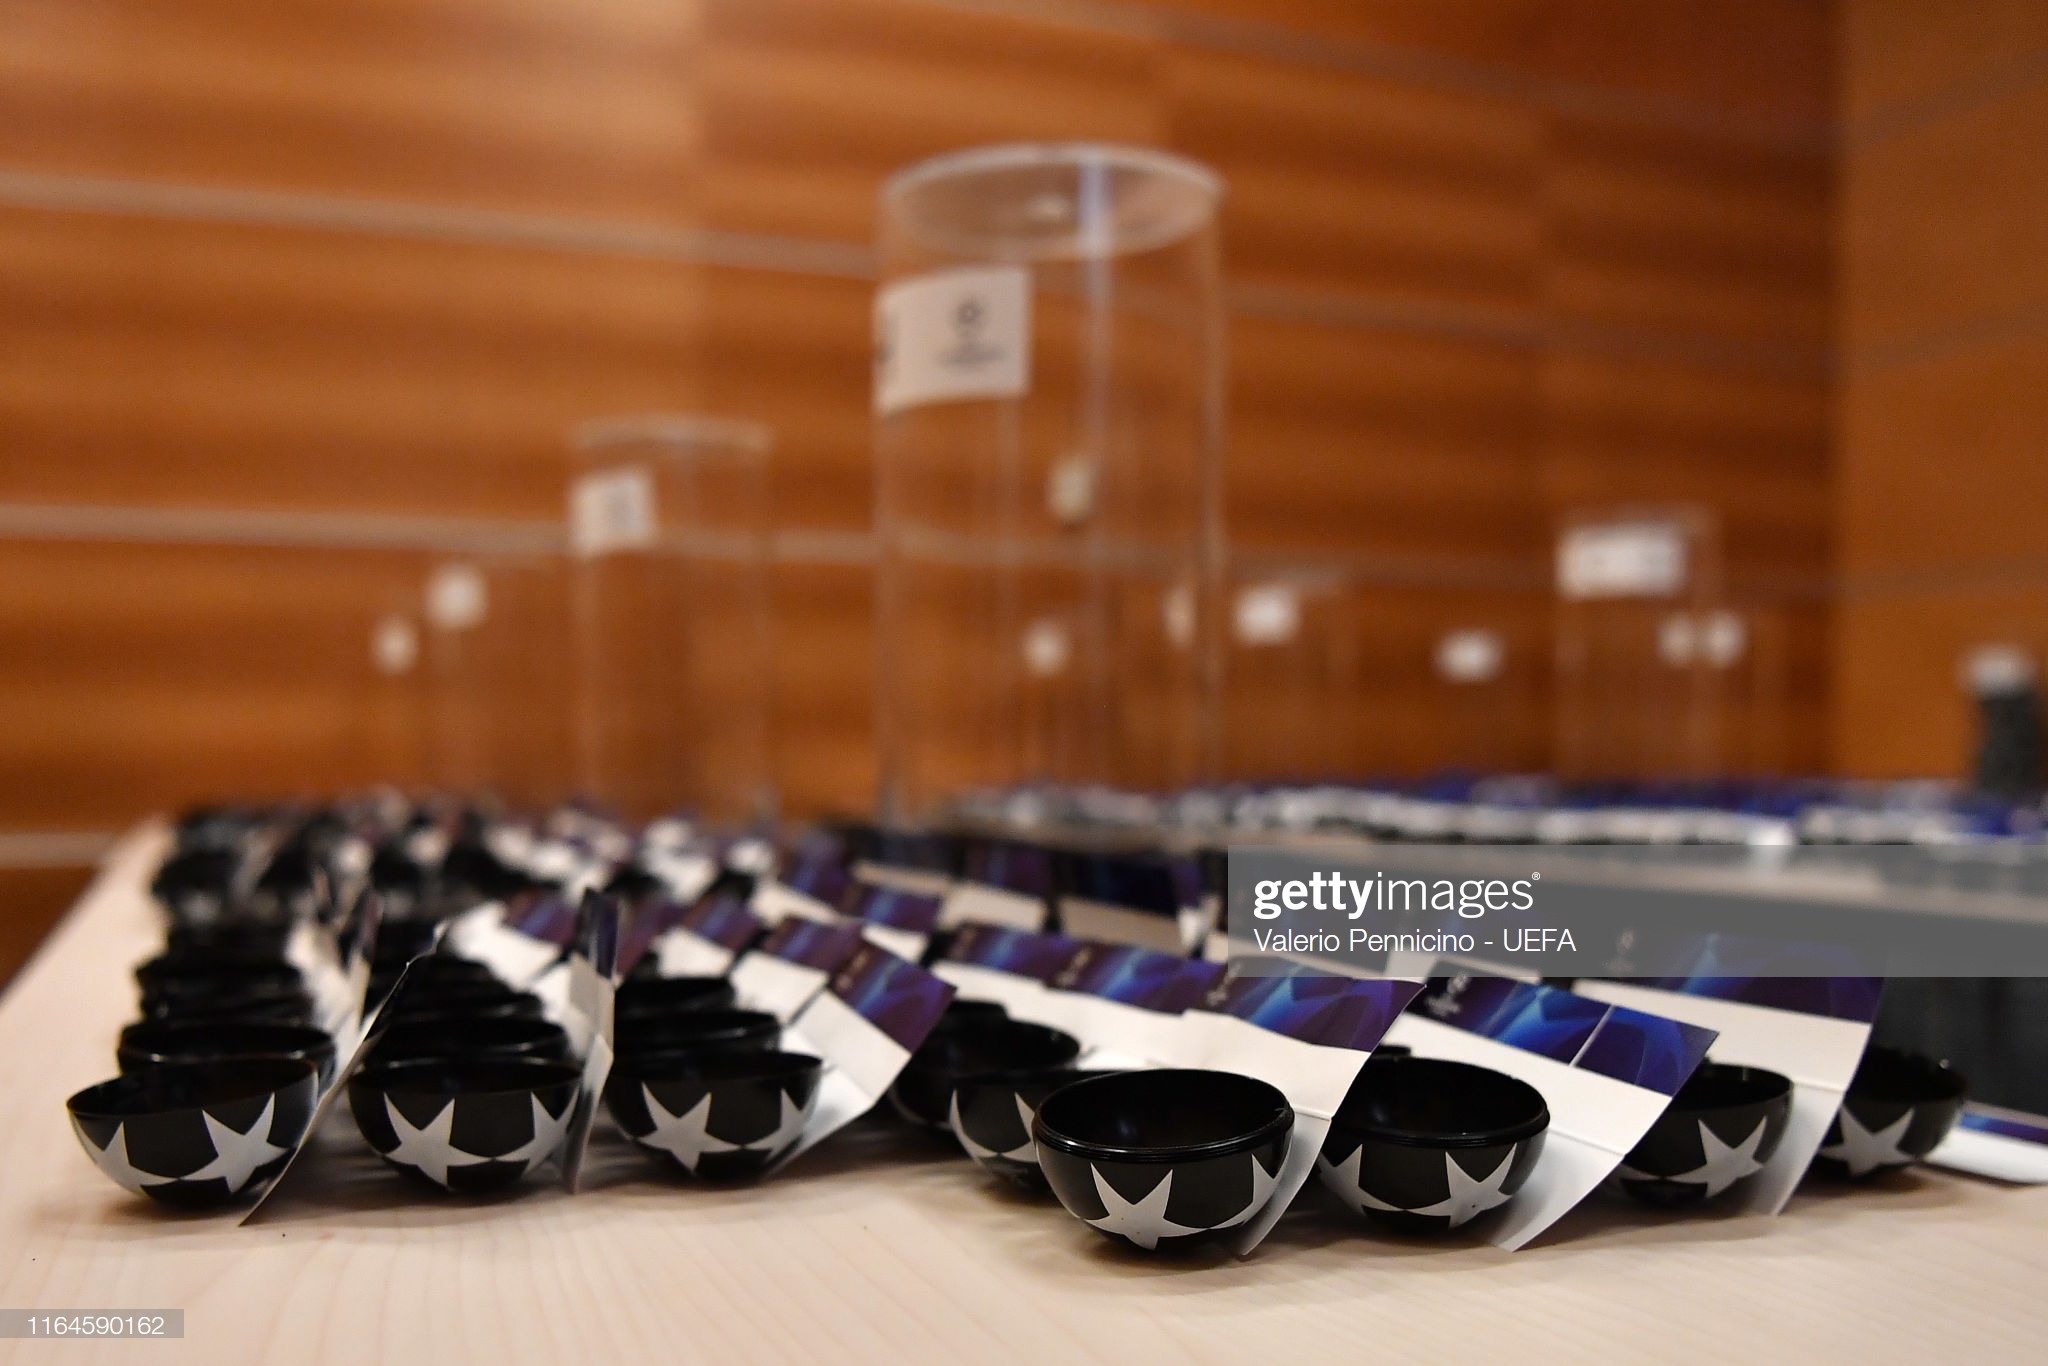 gettyimages-1164590162-2048x2048.jpg